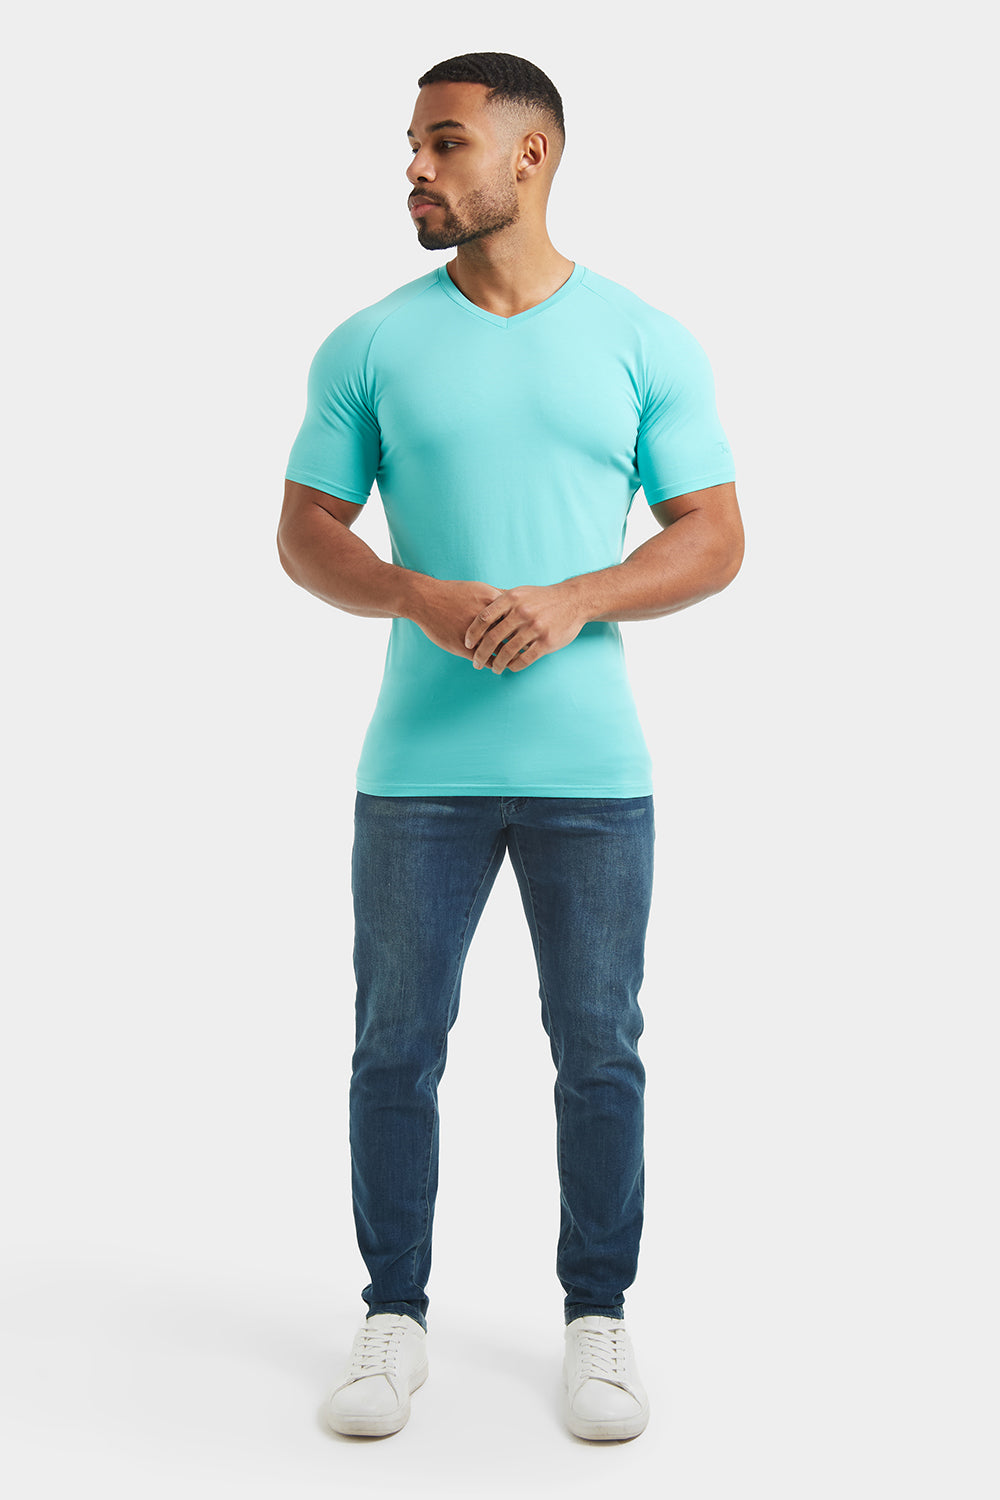 Premium Muscle Fit V-Neck in Spearmint - TAILORED ATHLETE - ROW